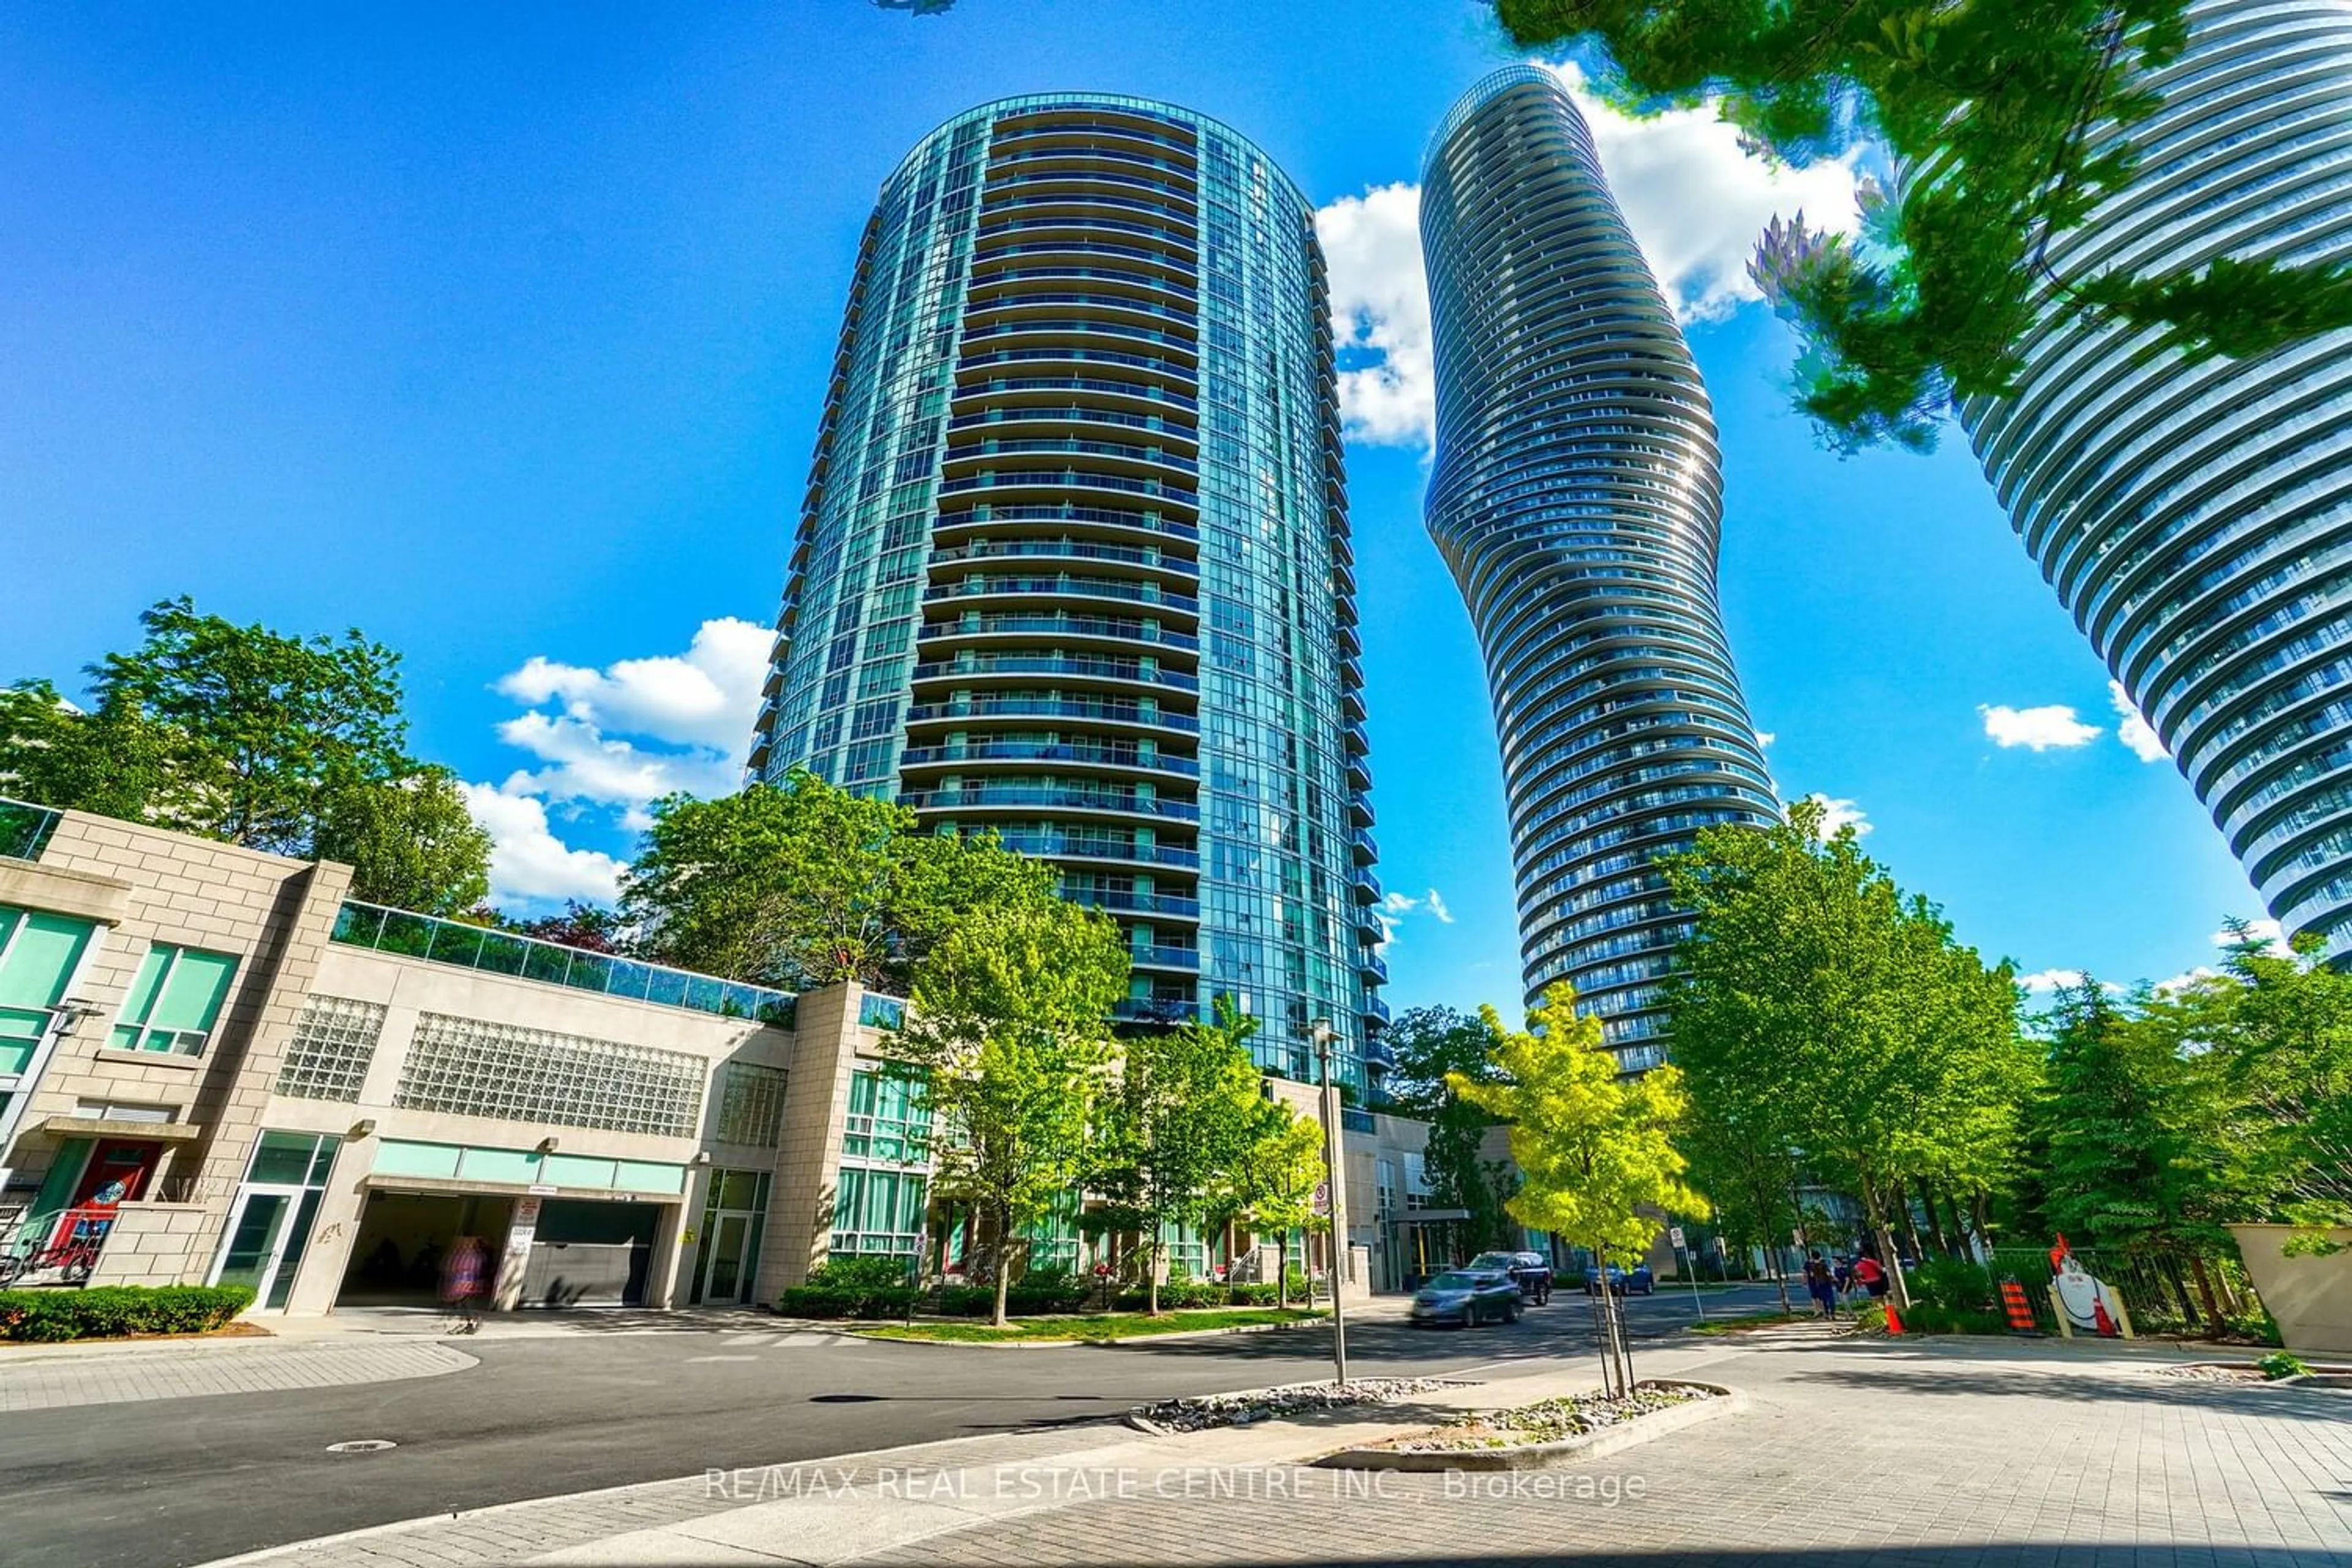 A pic from exterior of the house or condo for 70 Absolute Ave #1004, Mississauga Ontario L4Z 0A4